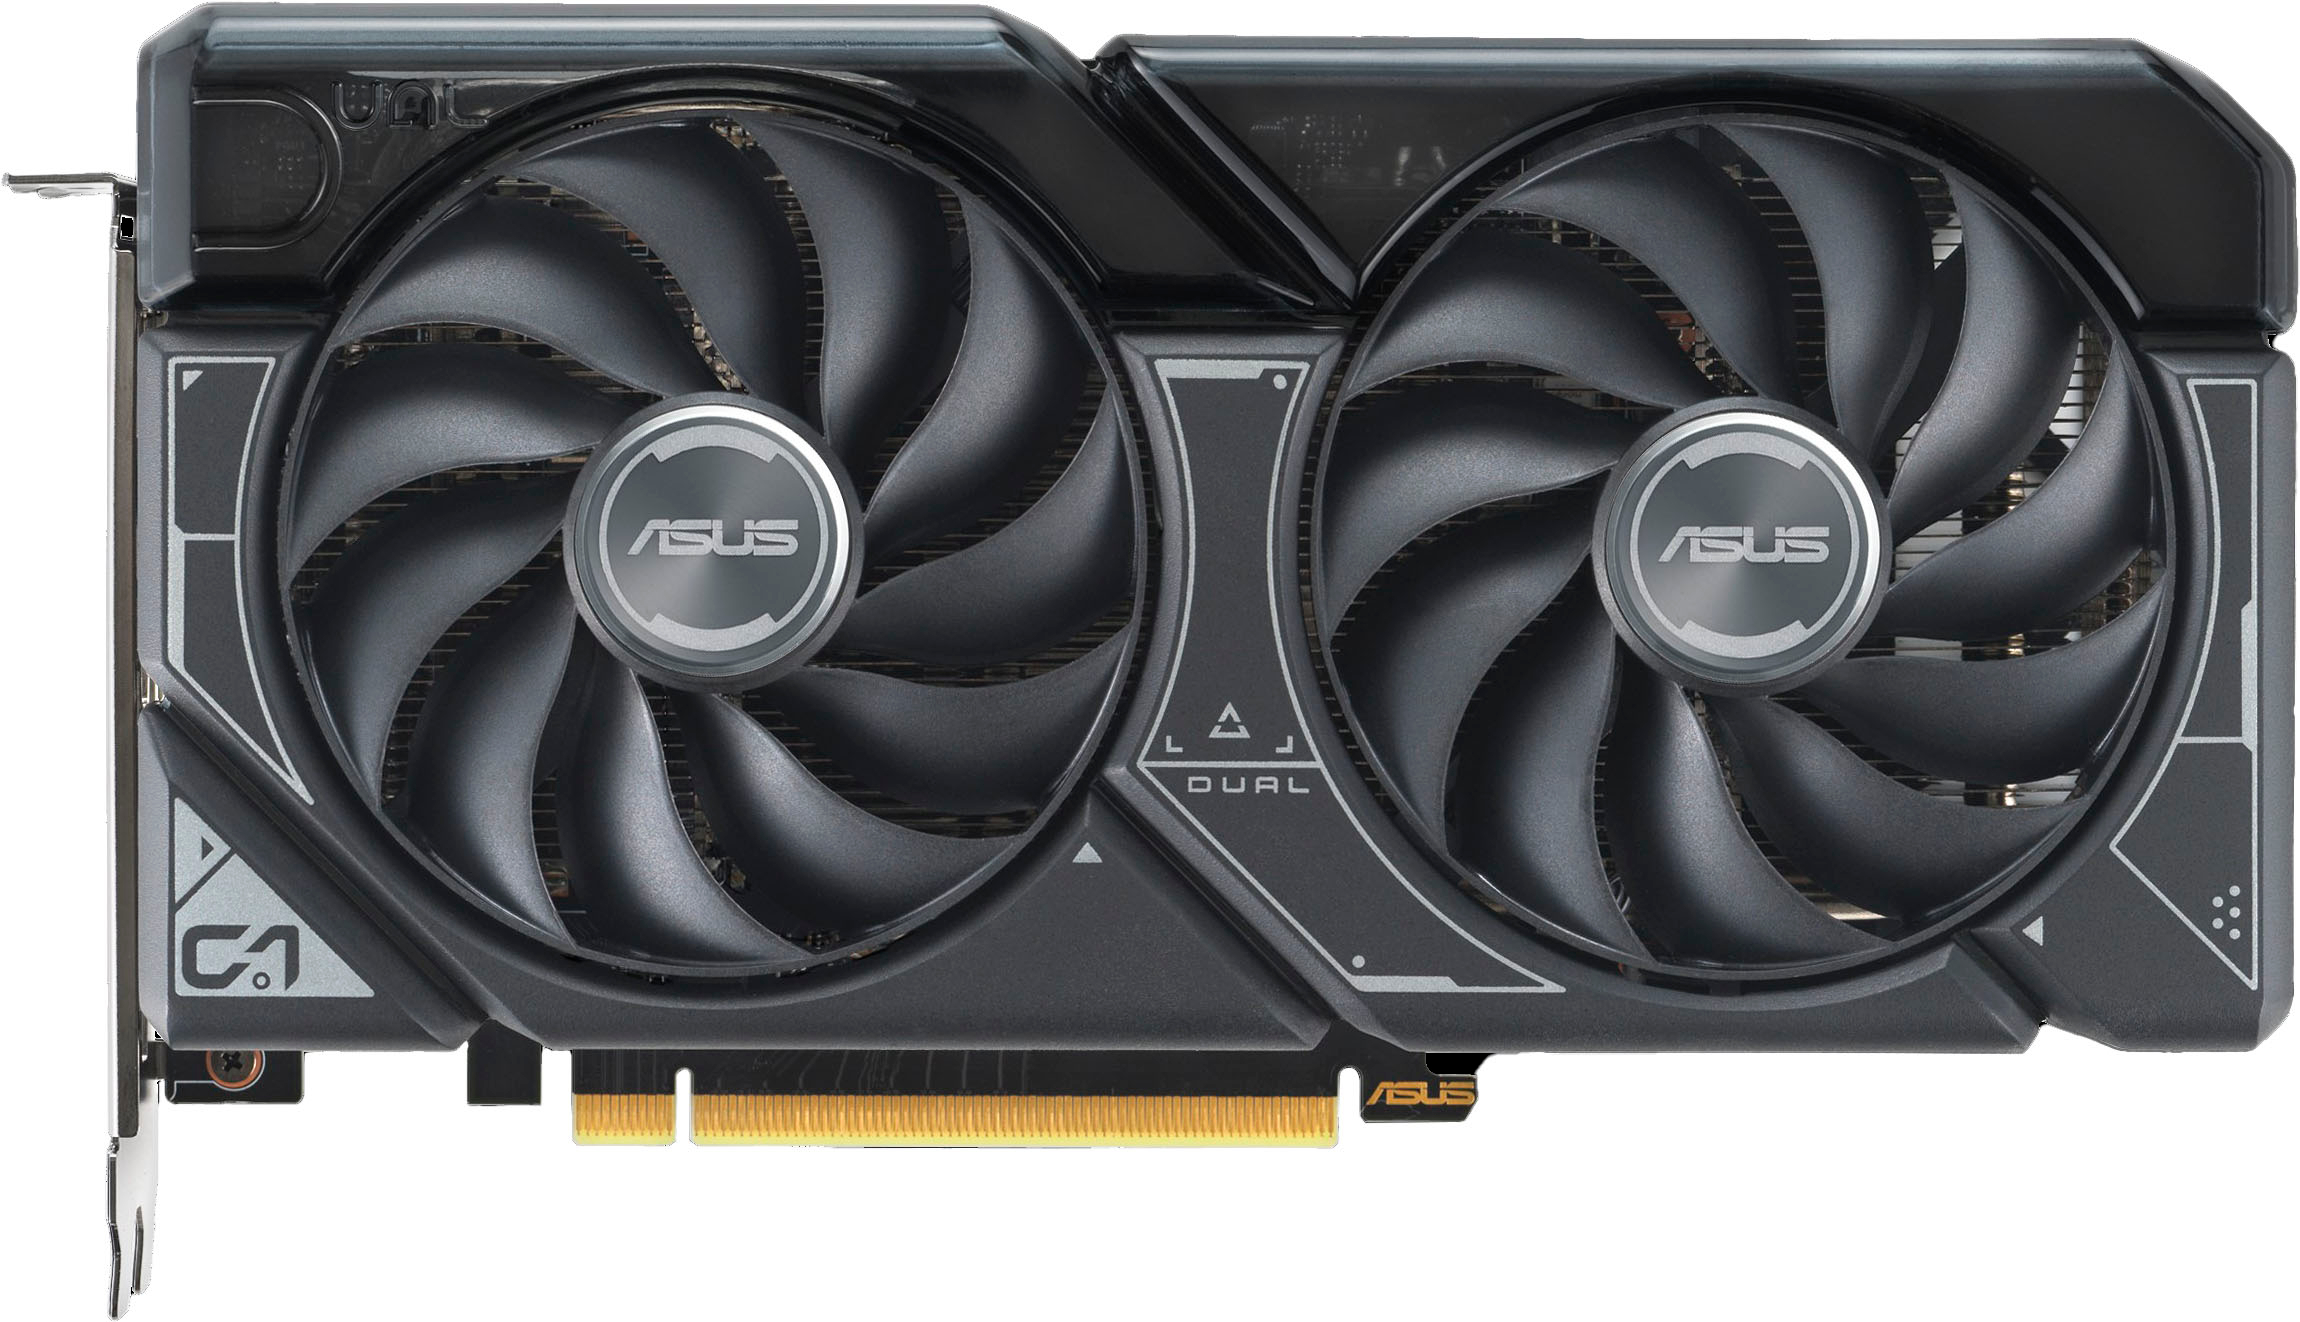 ASUS GeForce RTX 4060 Dual OC Review - The Best RTX 4060